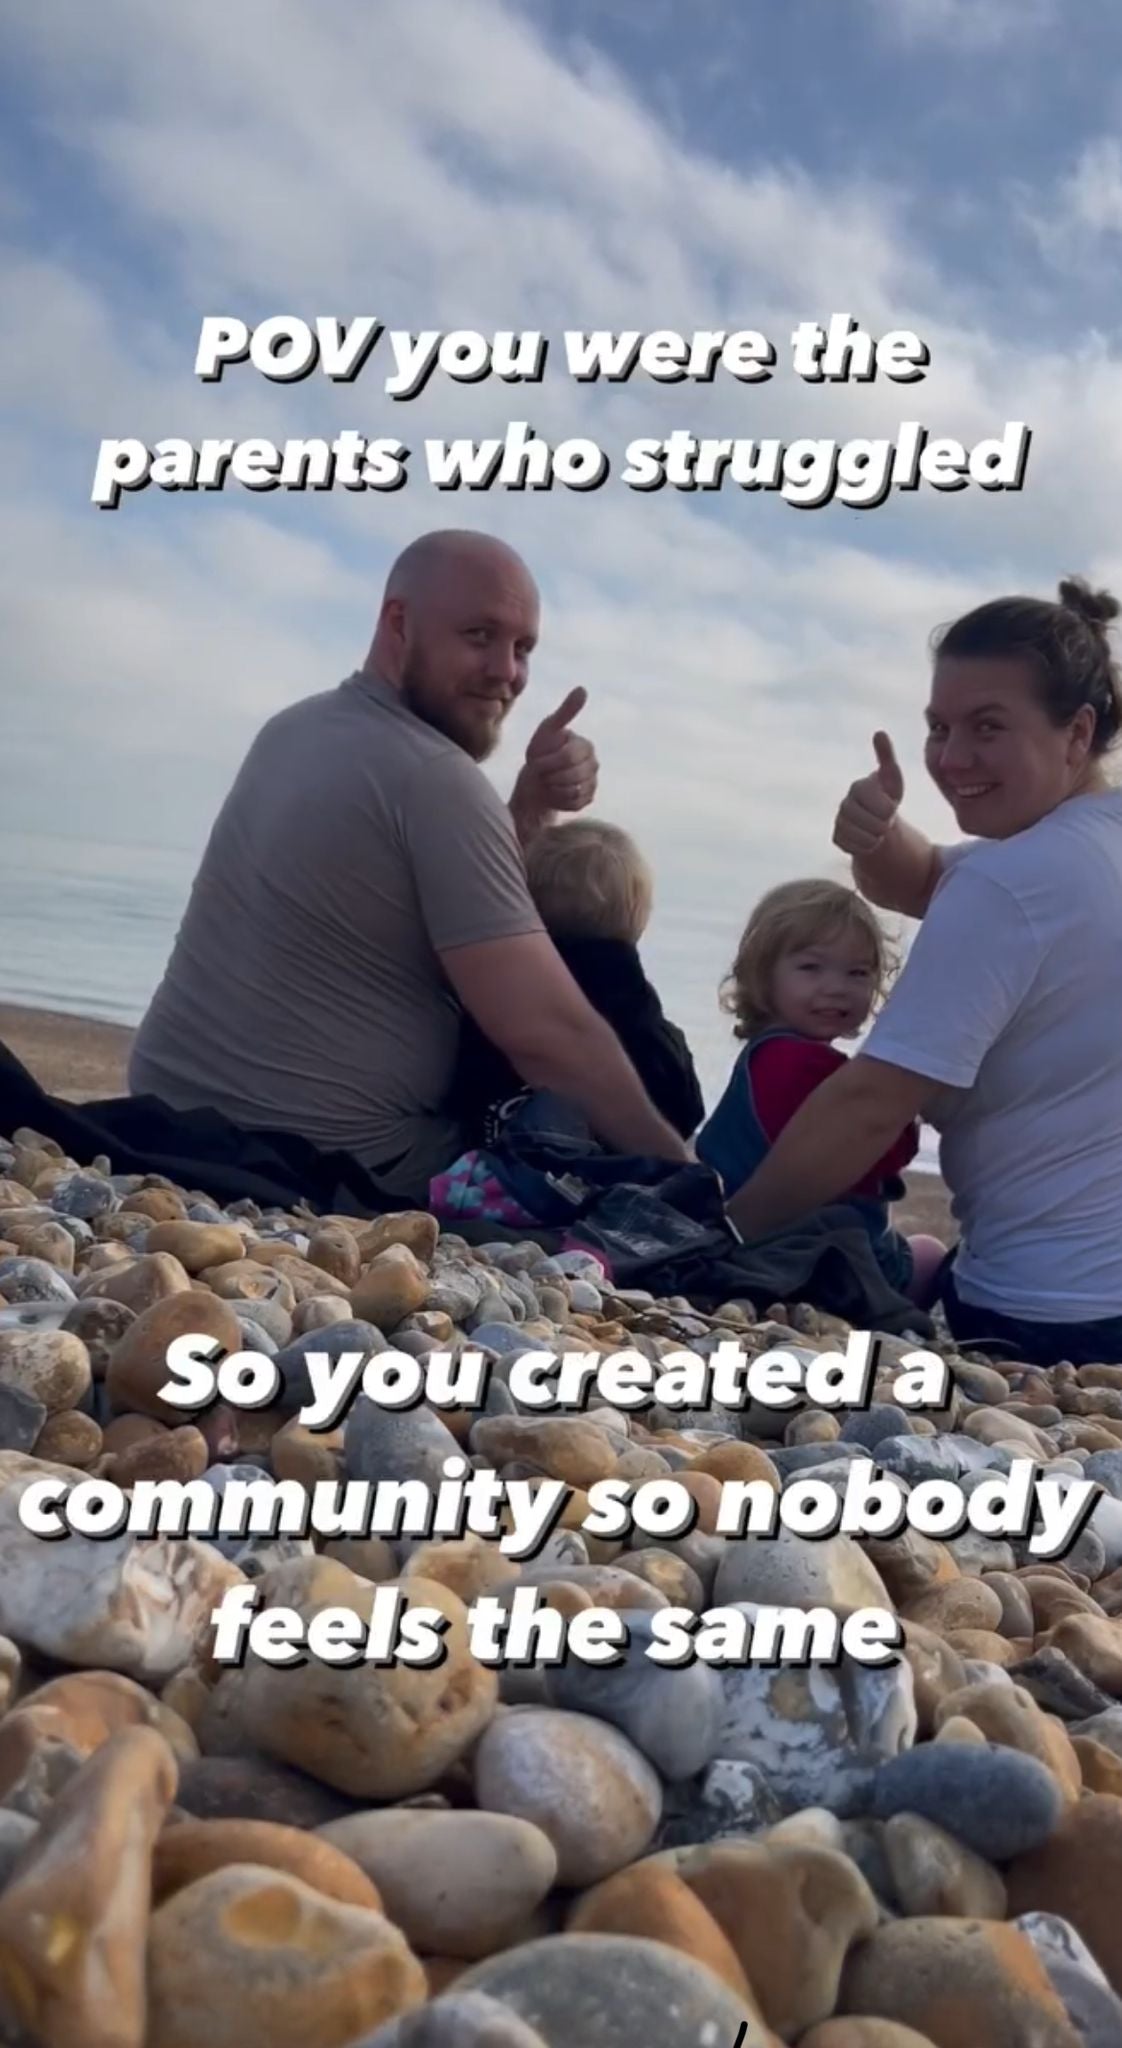 POv you were parents that struggled so you created a community so nobody feels the same - Pic of the honest family sitting on beach